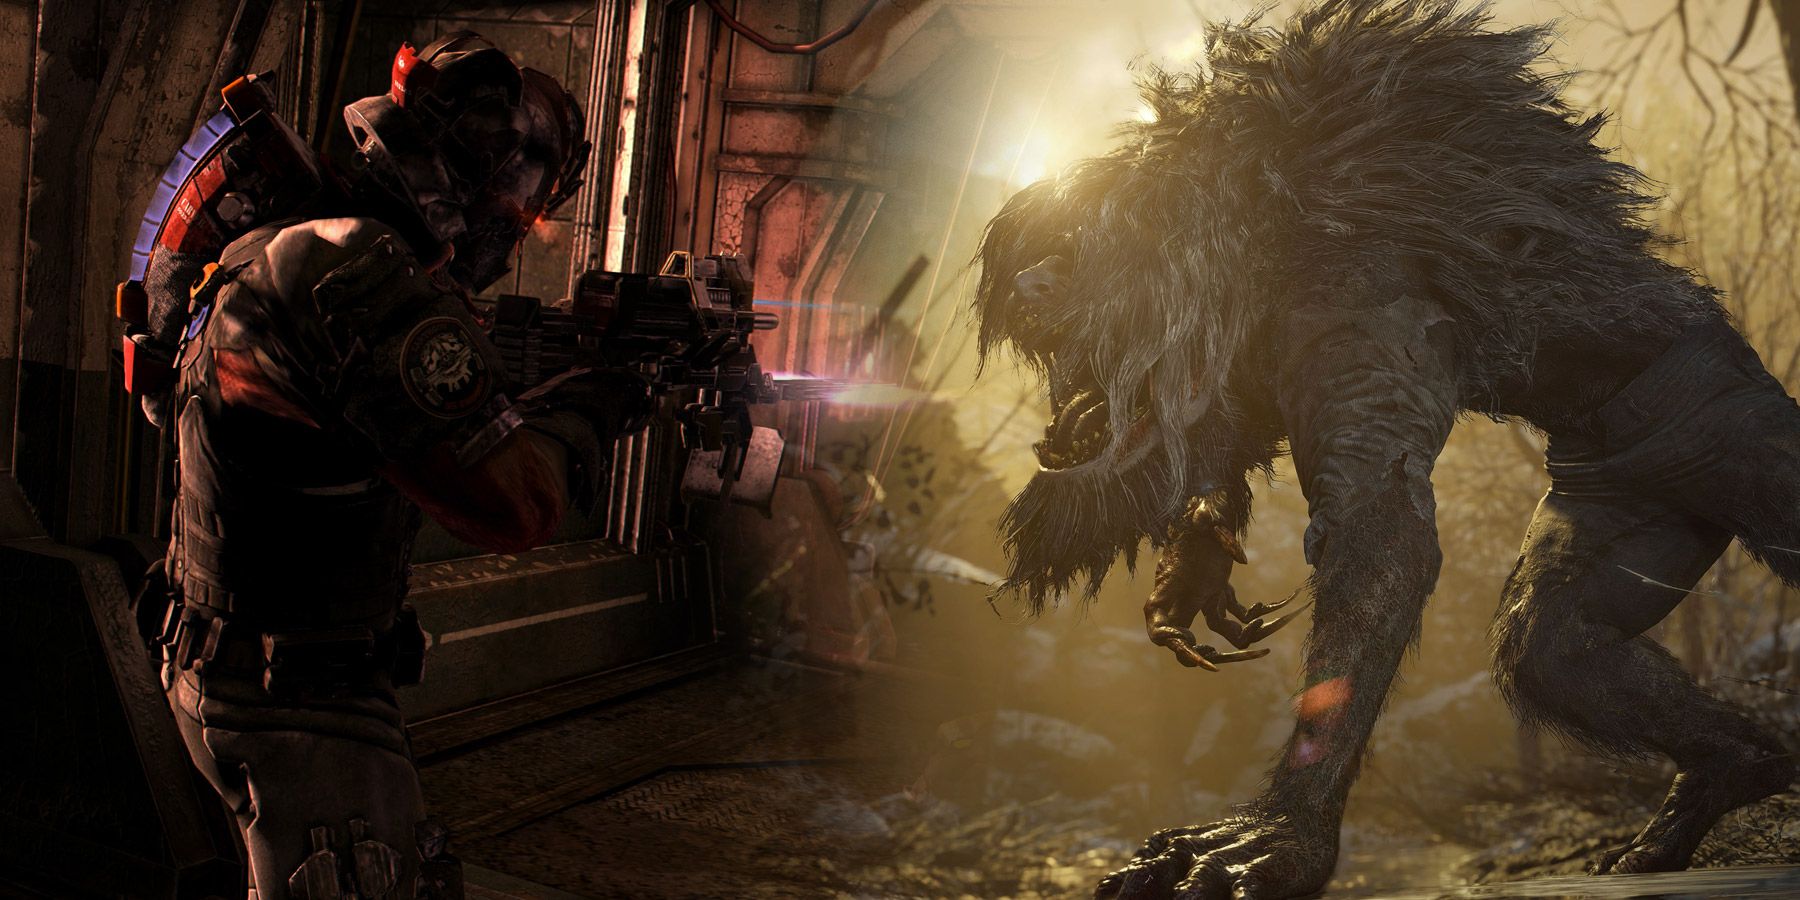 Review: Who put Gears of War in my Dead Space 3?!